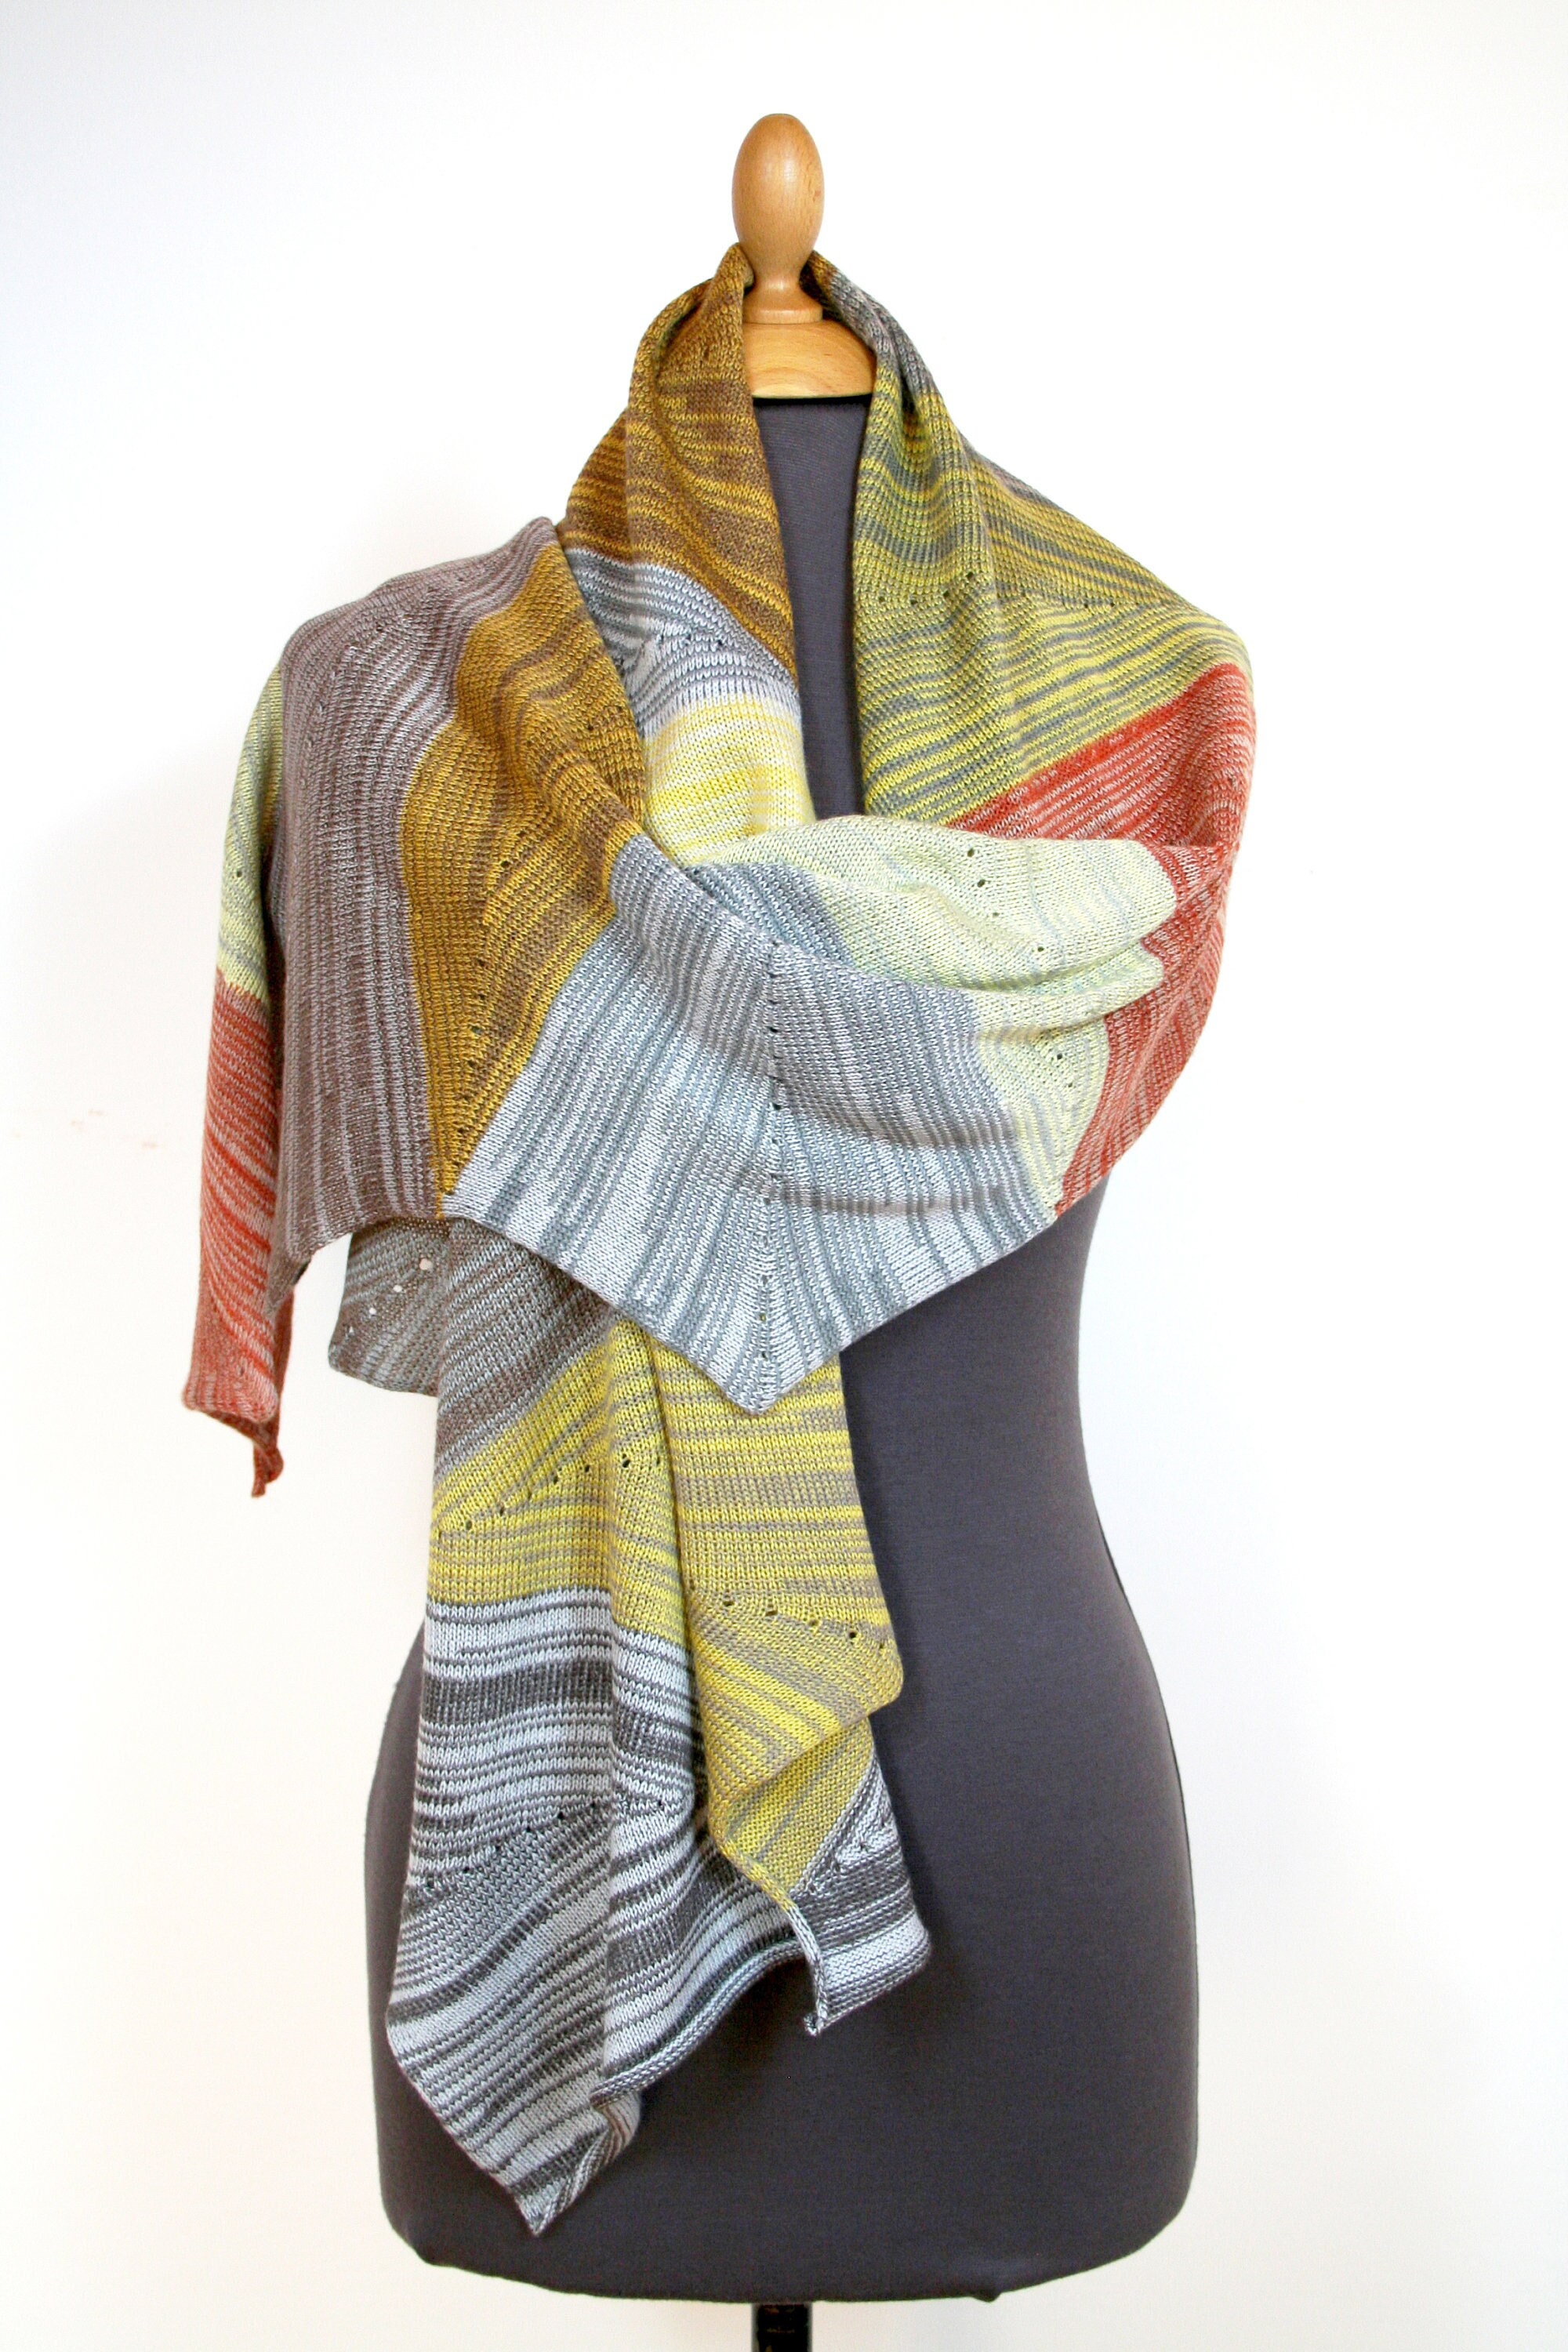 Stole Made of Wool in Natural Colors, Knitted Women's Scarf, Scarf With a  Harmonious Color Palette, Unique Wrap, Anniversary Gift 